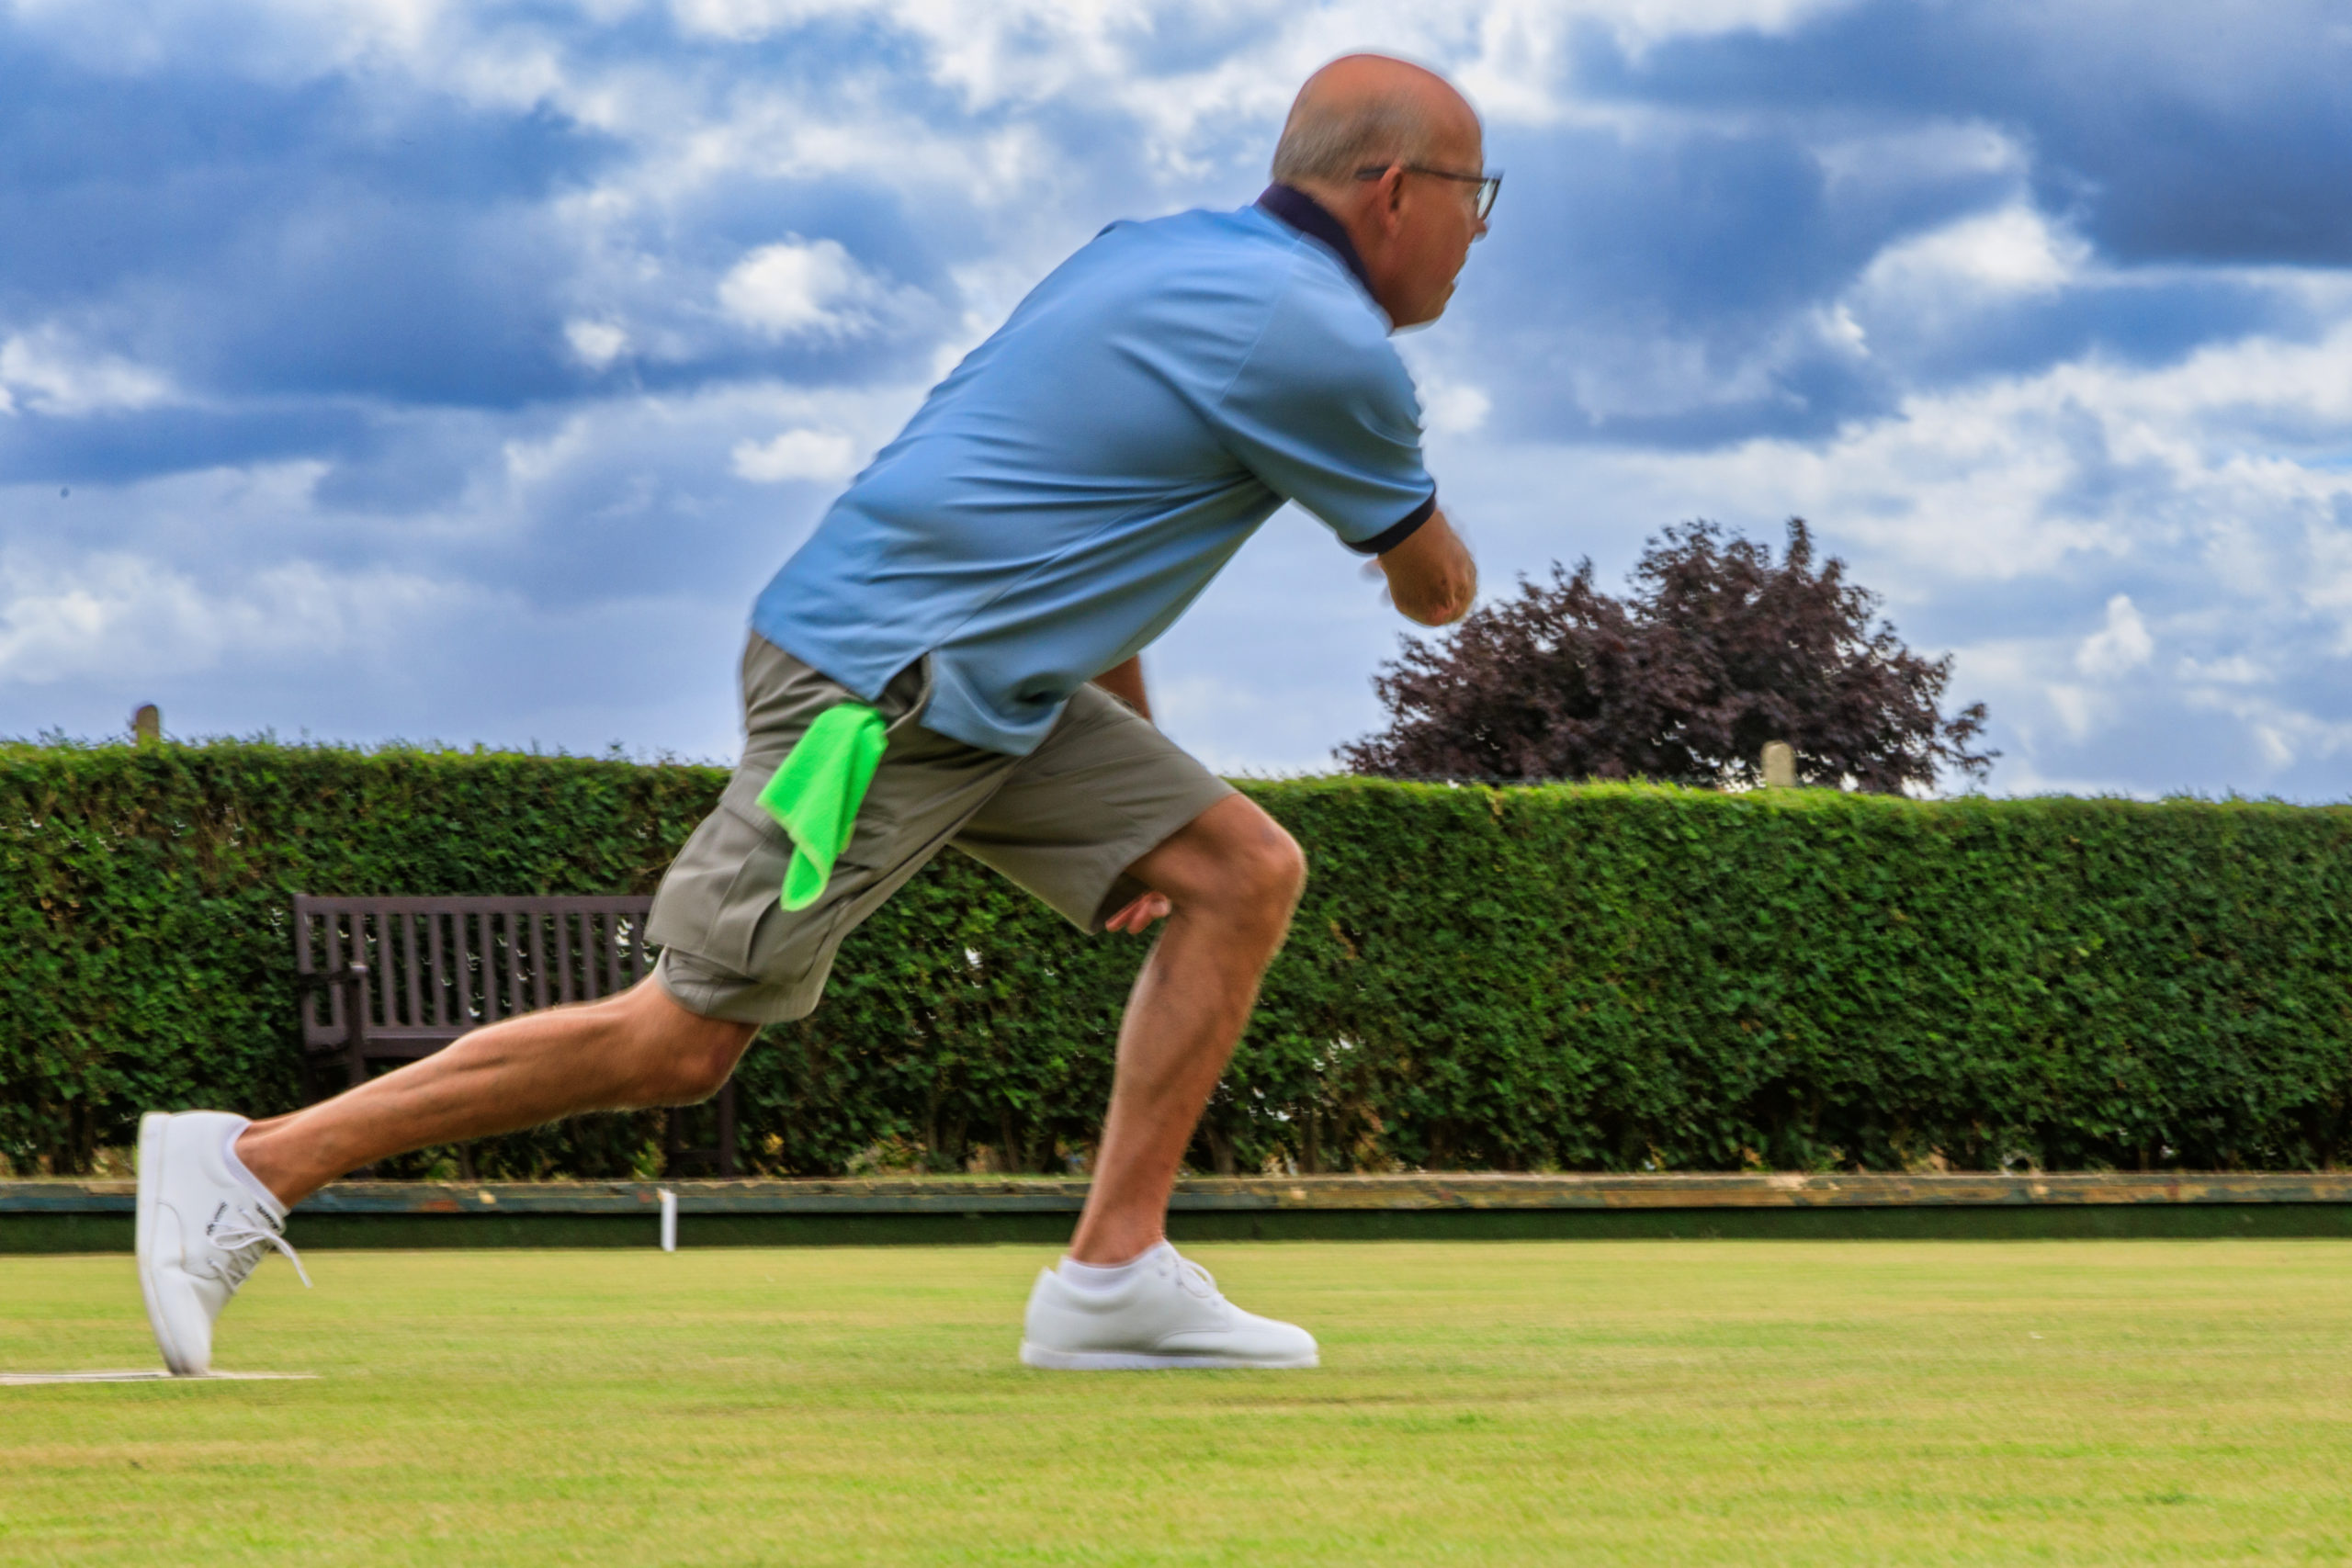 Playing the sport of lawn bowls at Aston Clinton Lawn Bowls Club Buckinghamshire with a crowd looking on